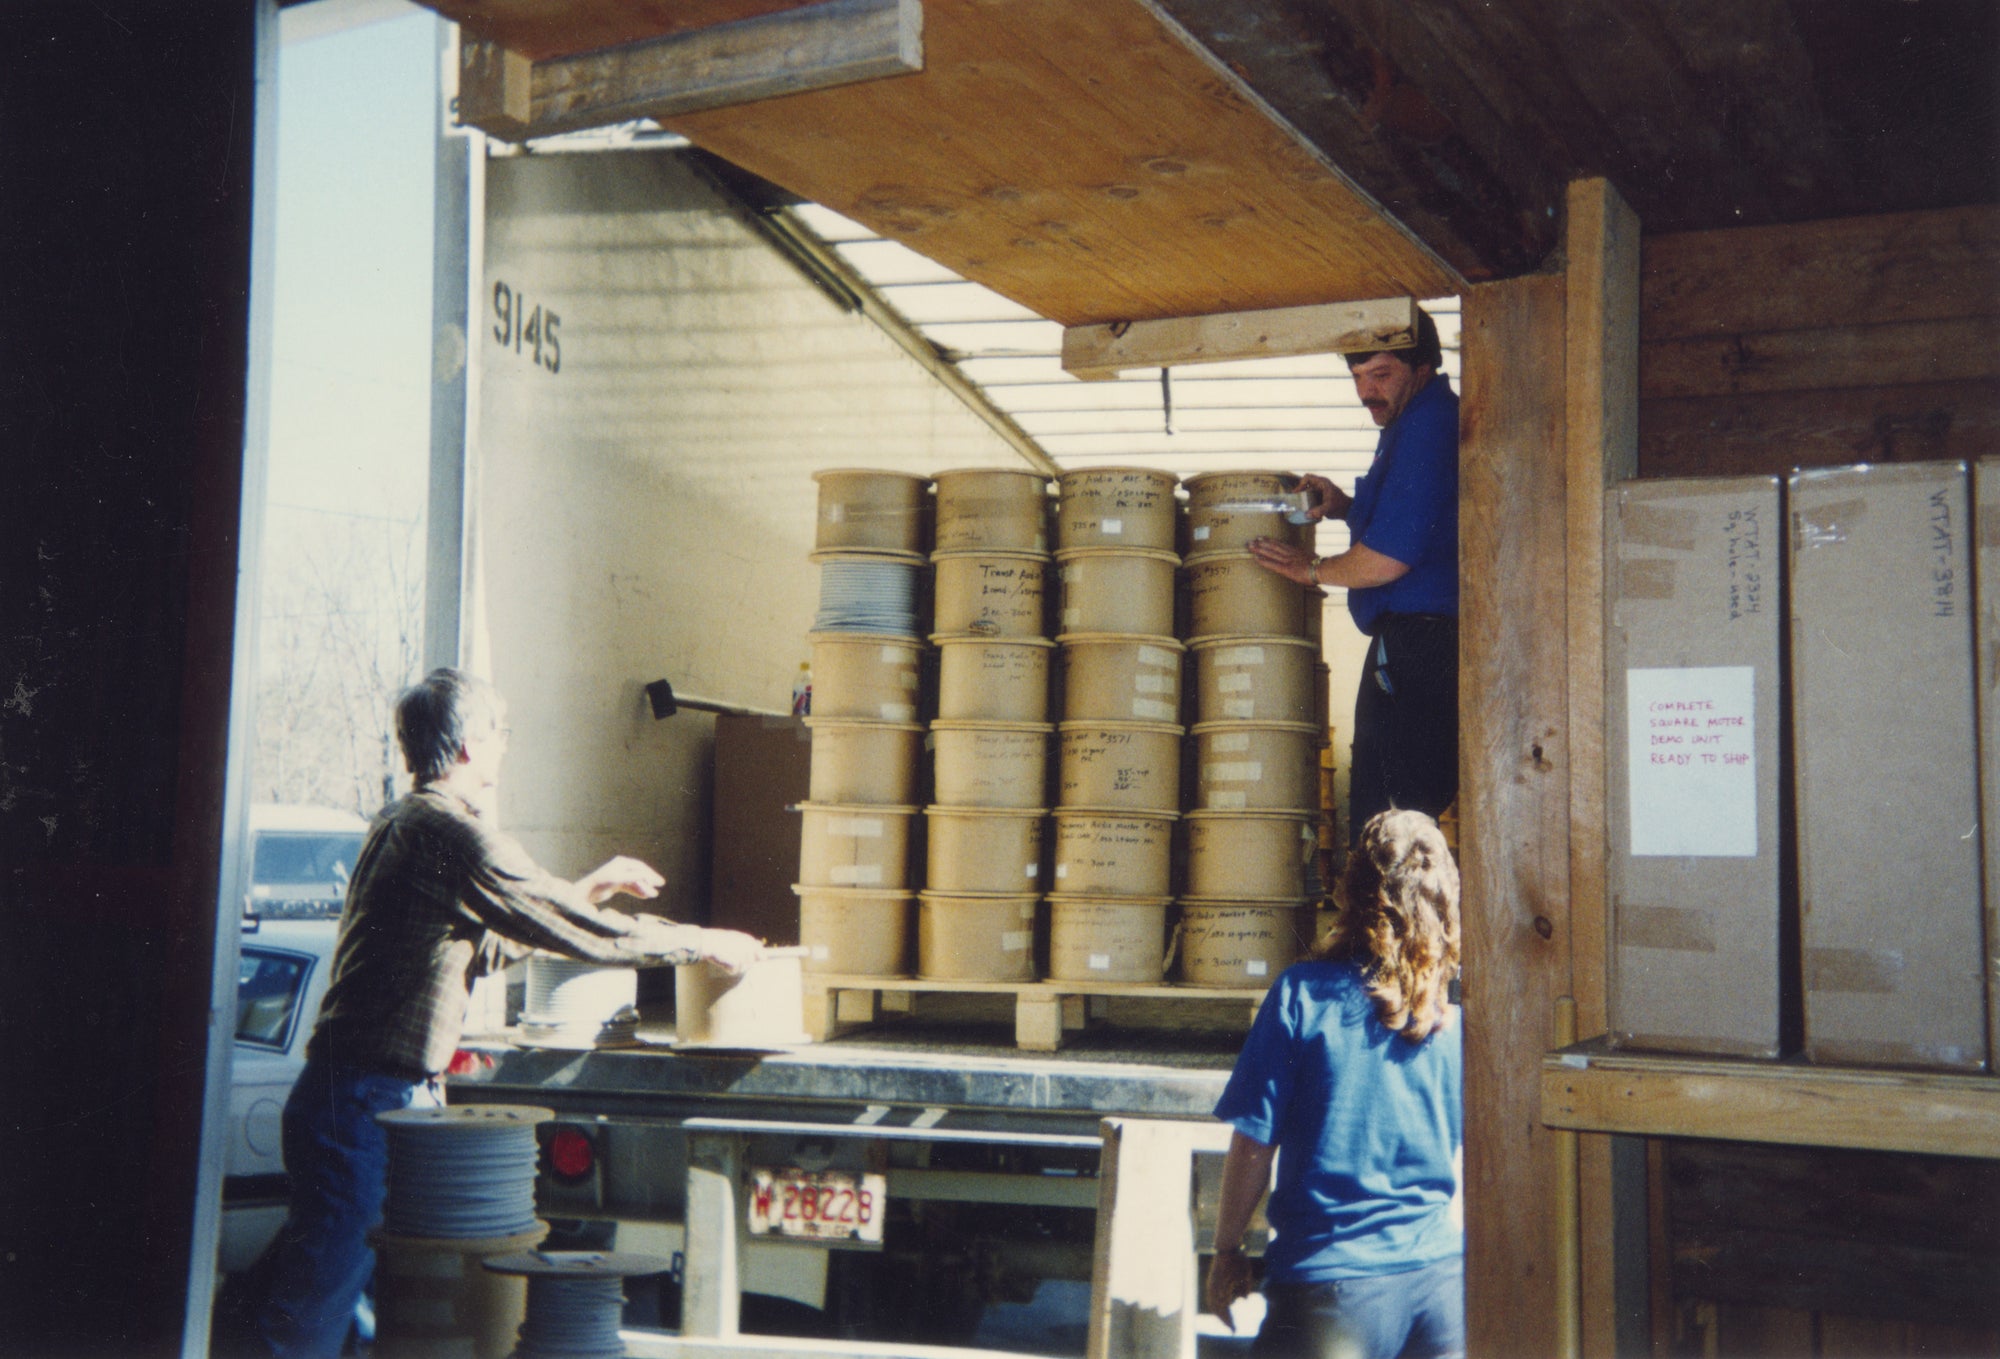 A man loading boxes into a truck.